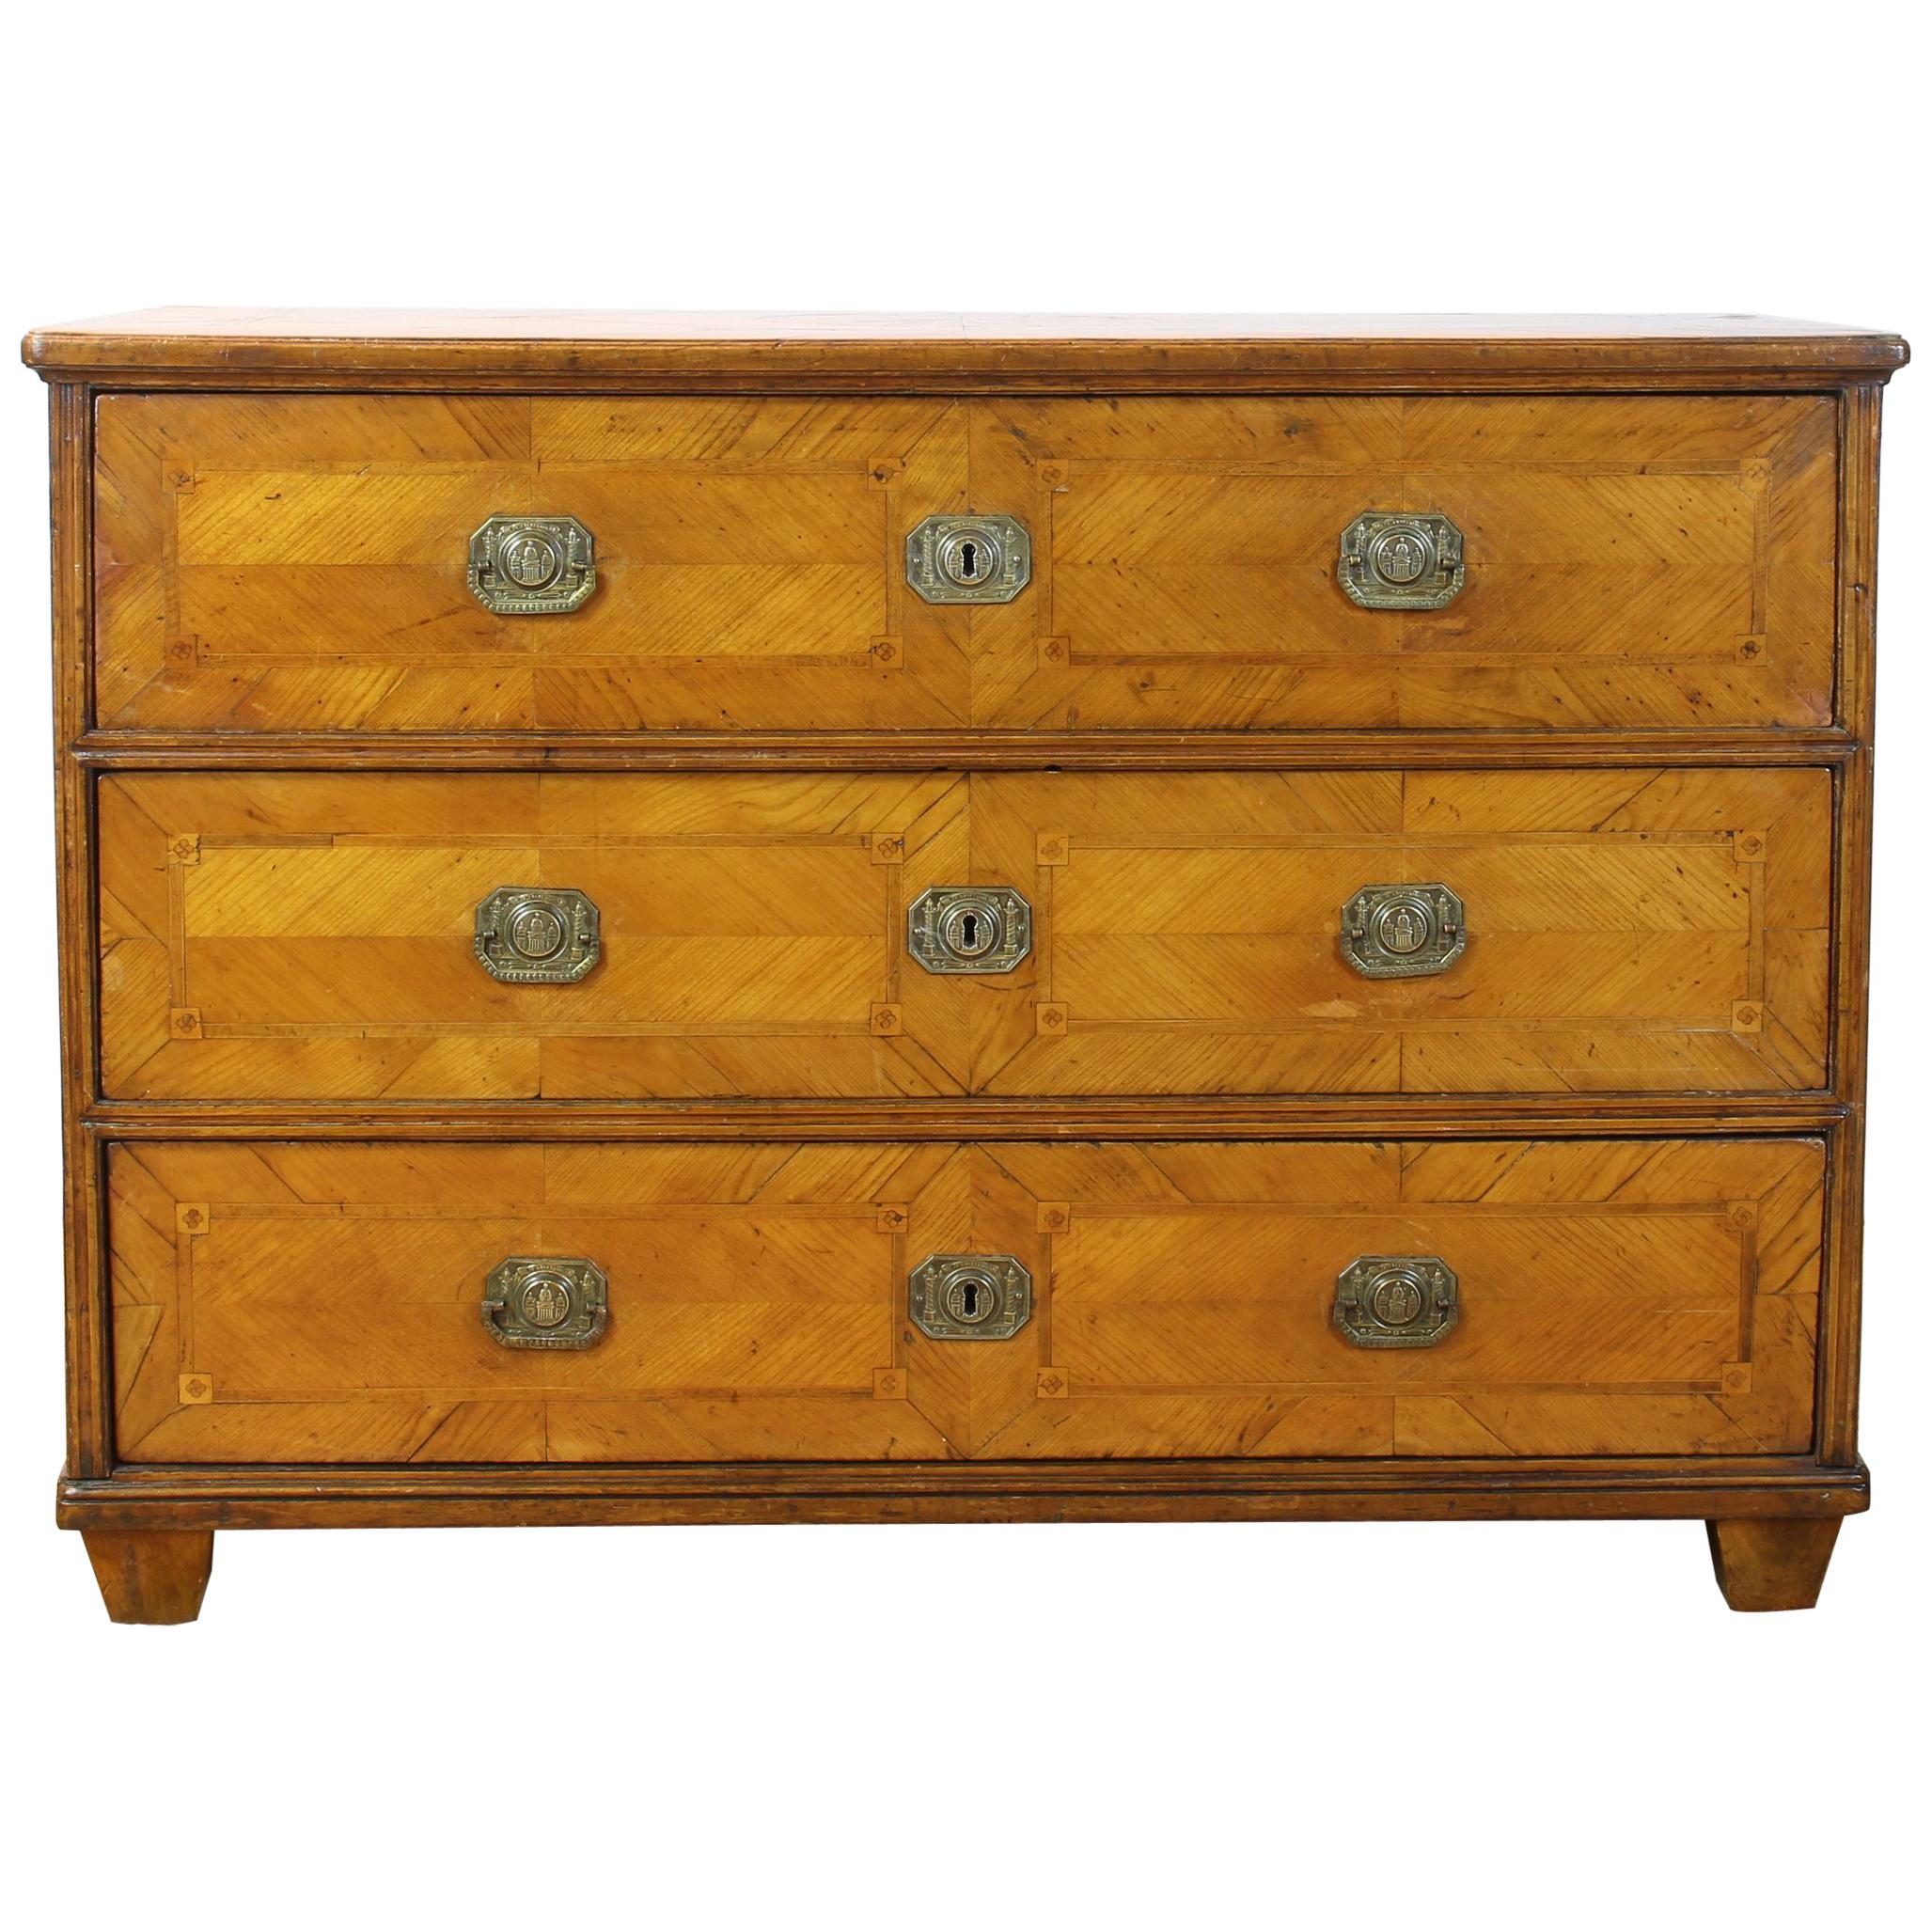 Austrian Early 19th Century Neoclassical Fruitwood Commode